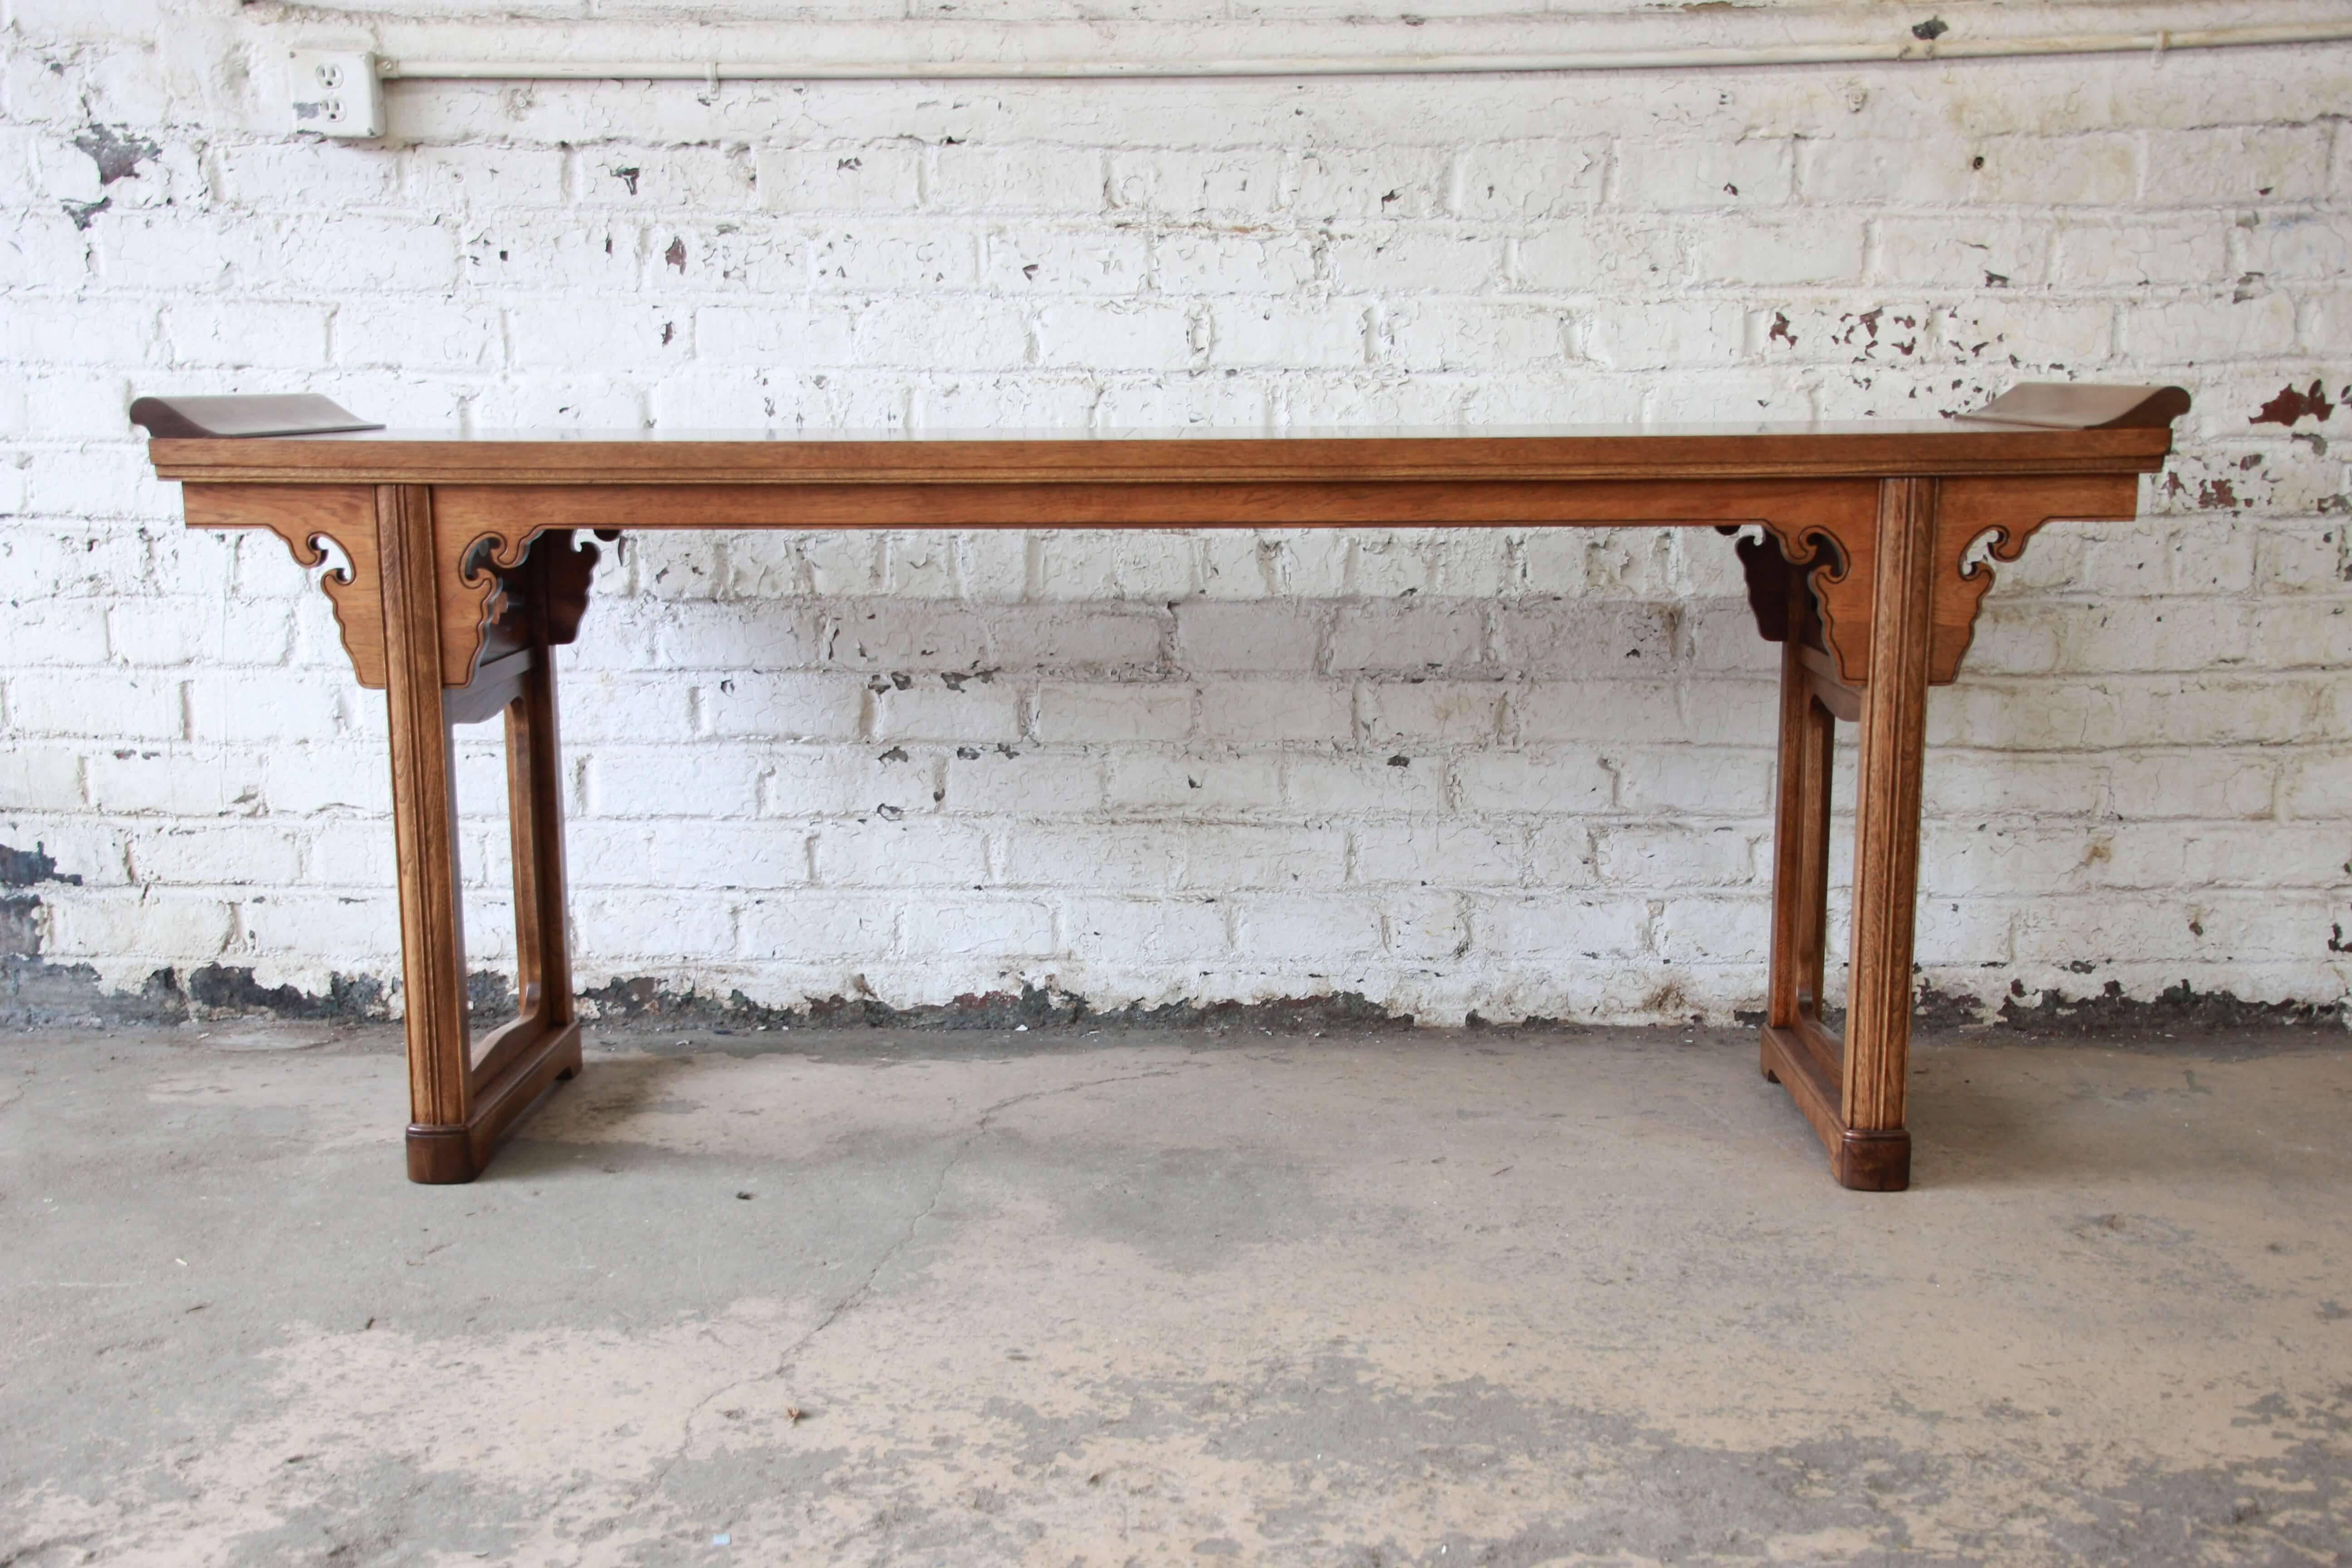 British Colonial Beautiful Burled Altar Table by Baker